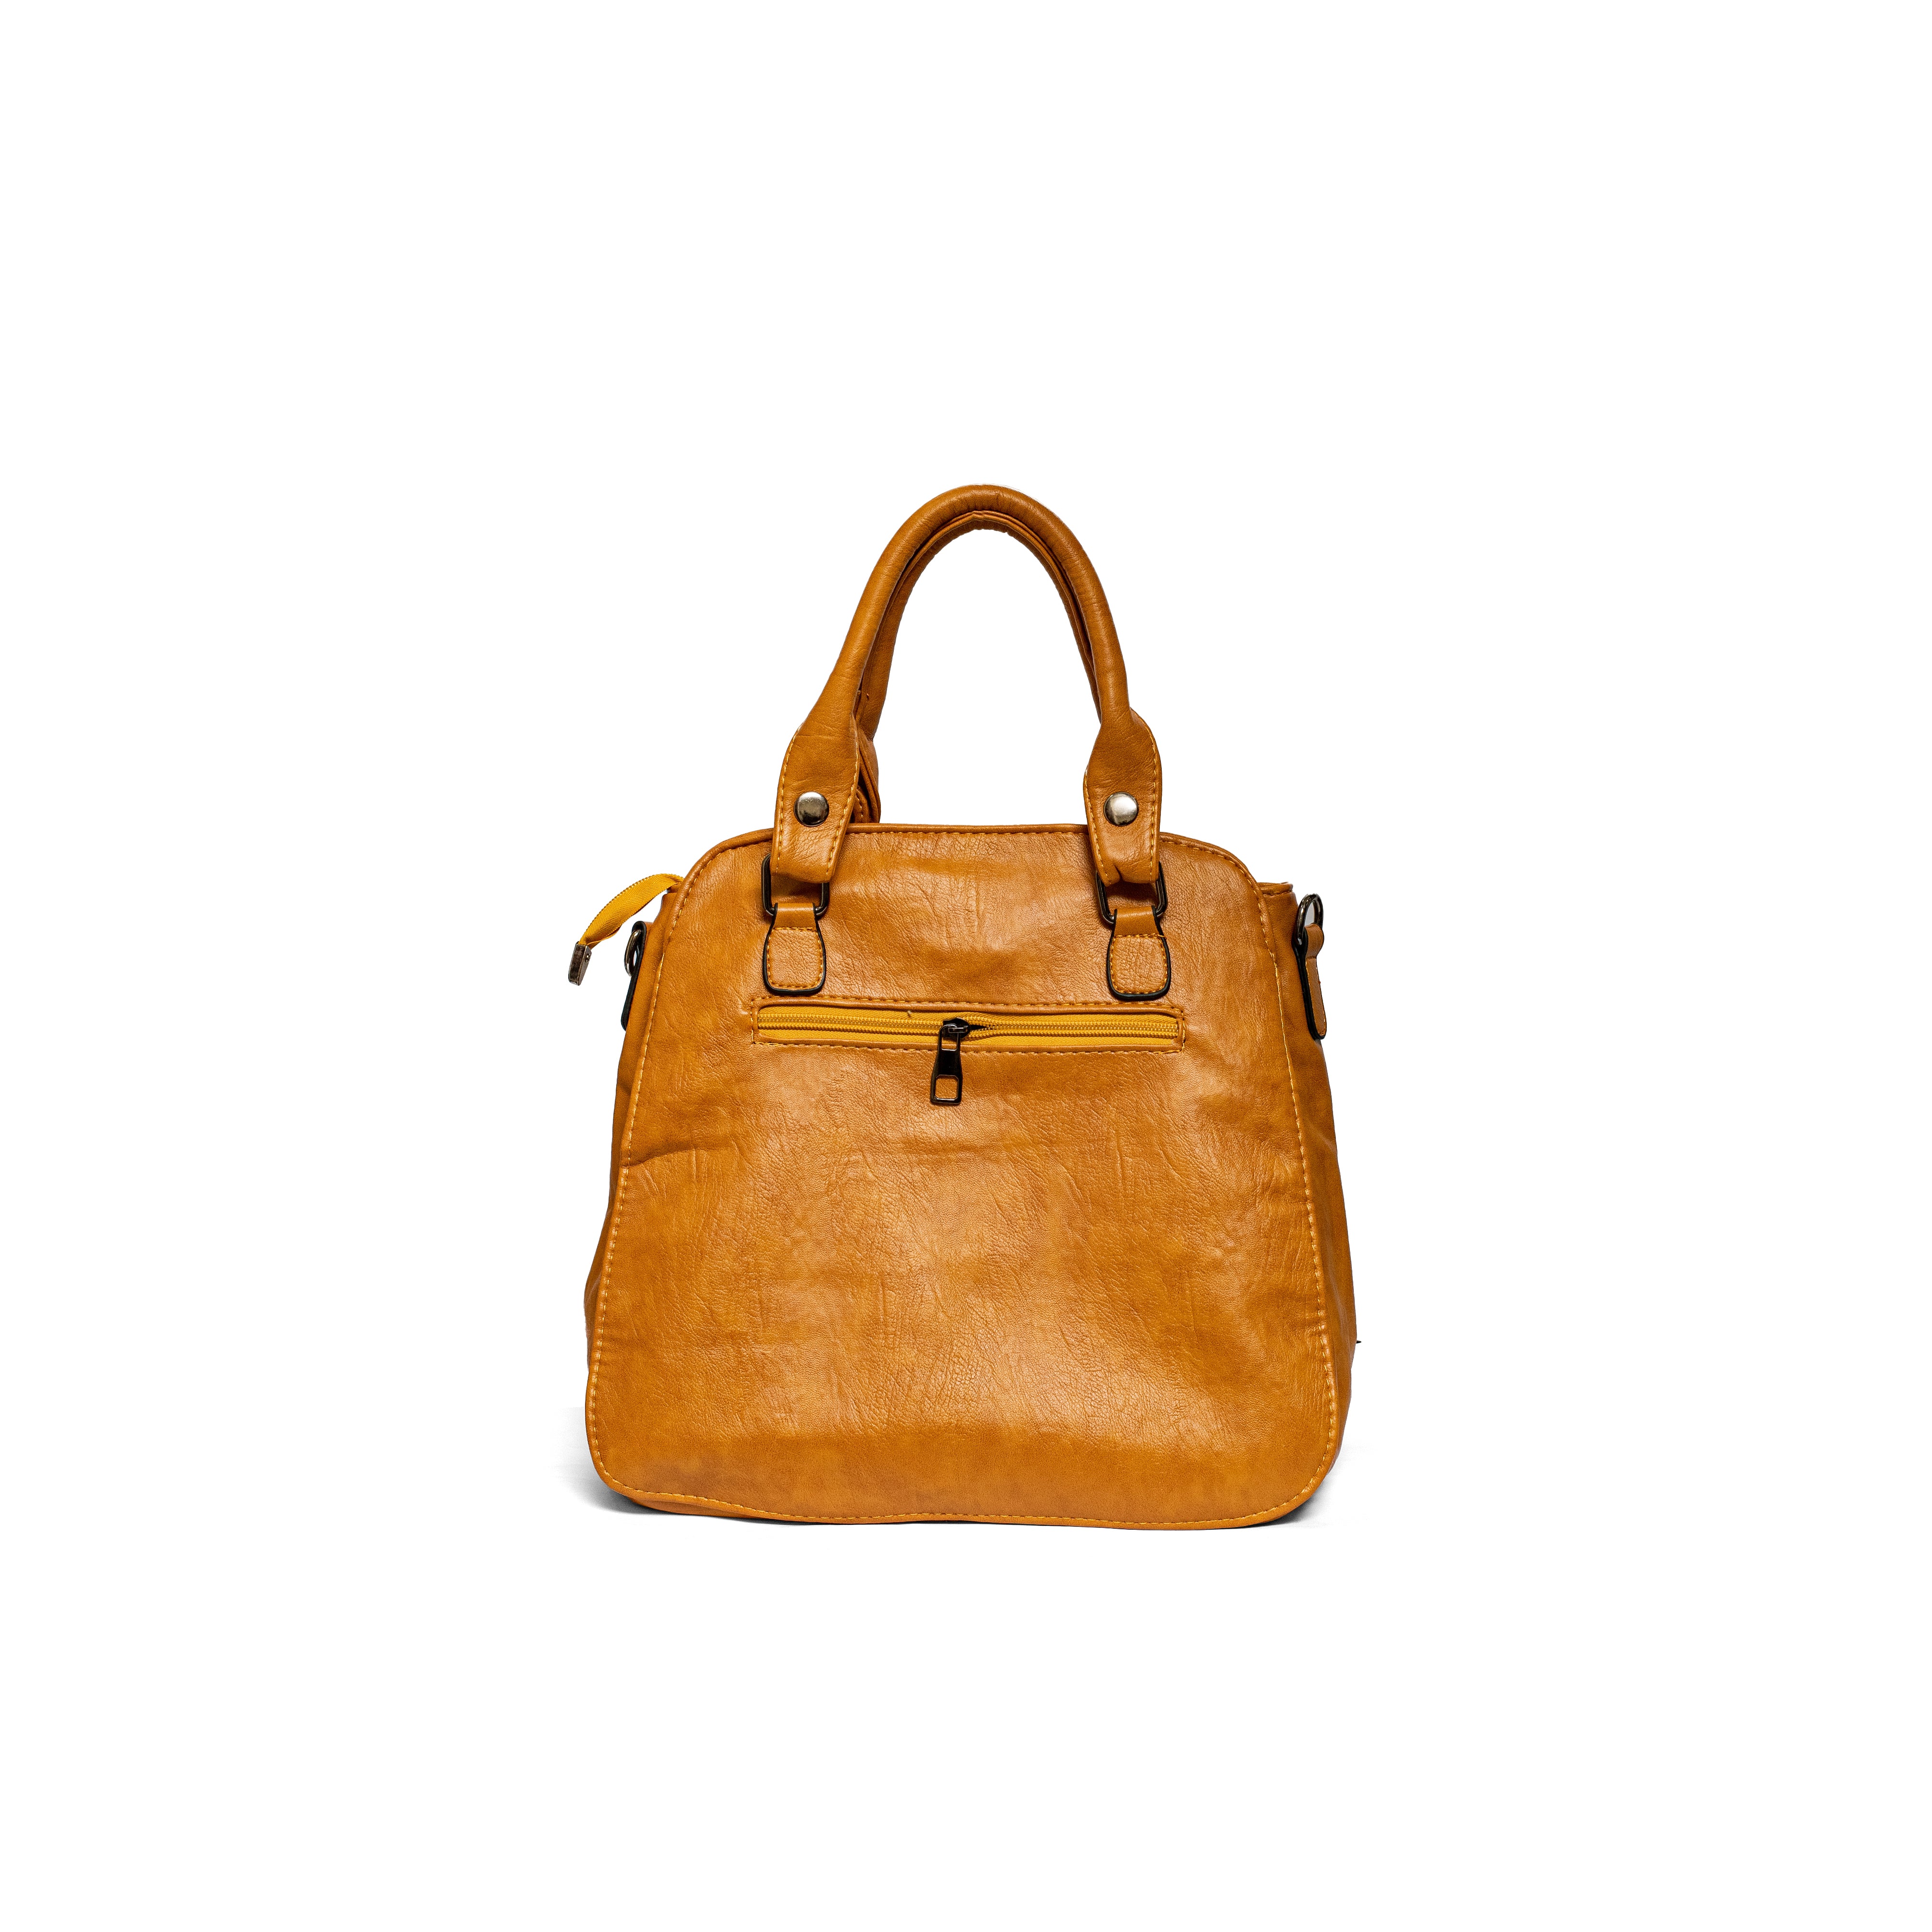 Imported Soft Leather Bag